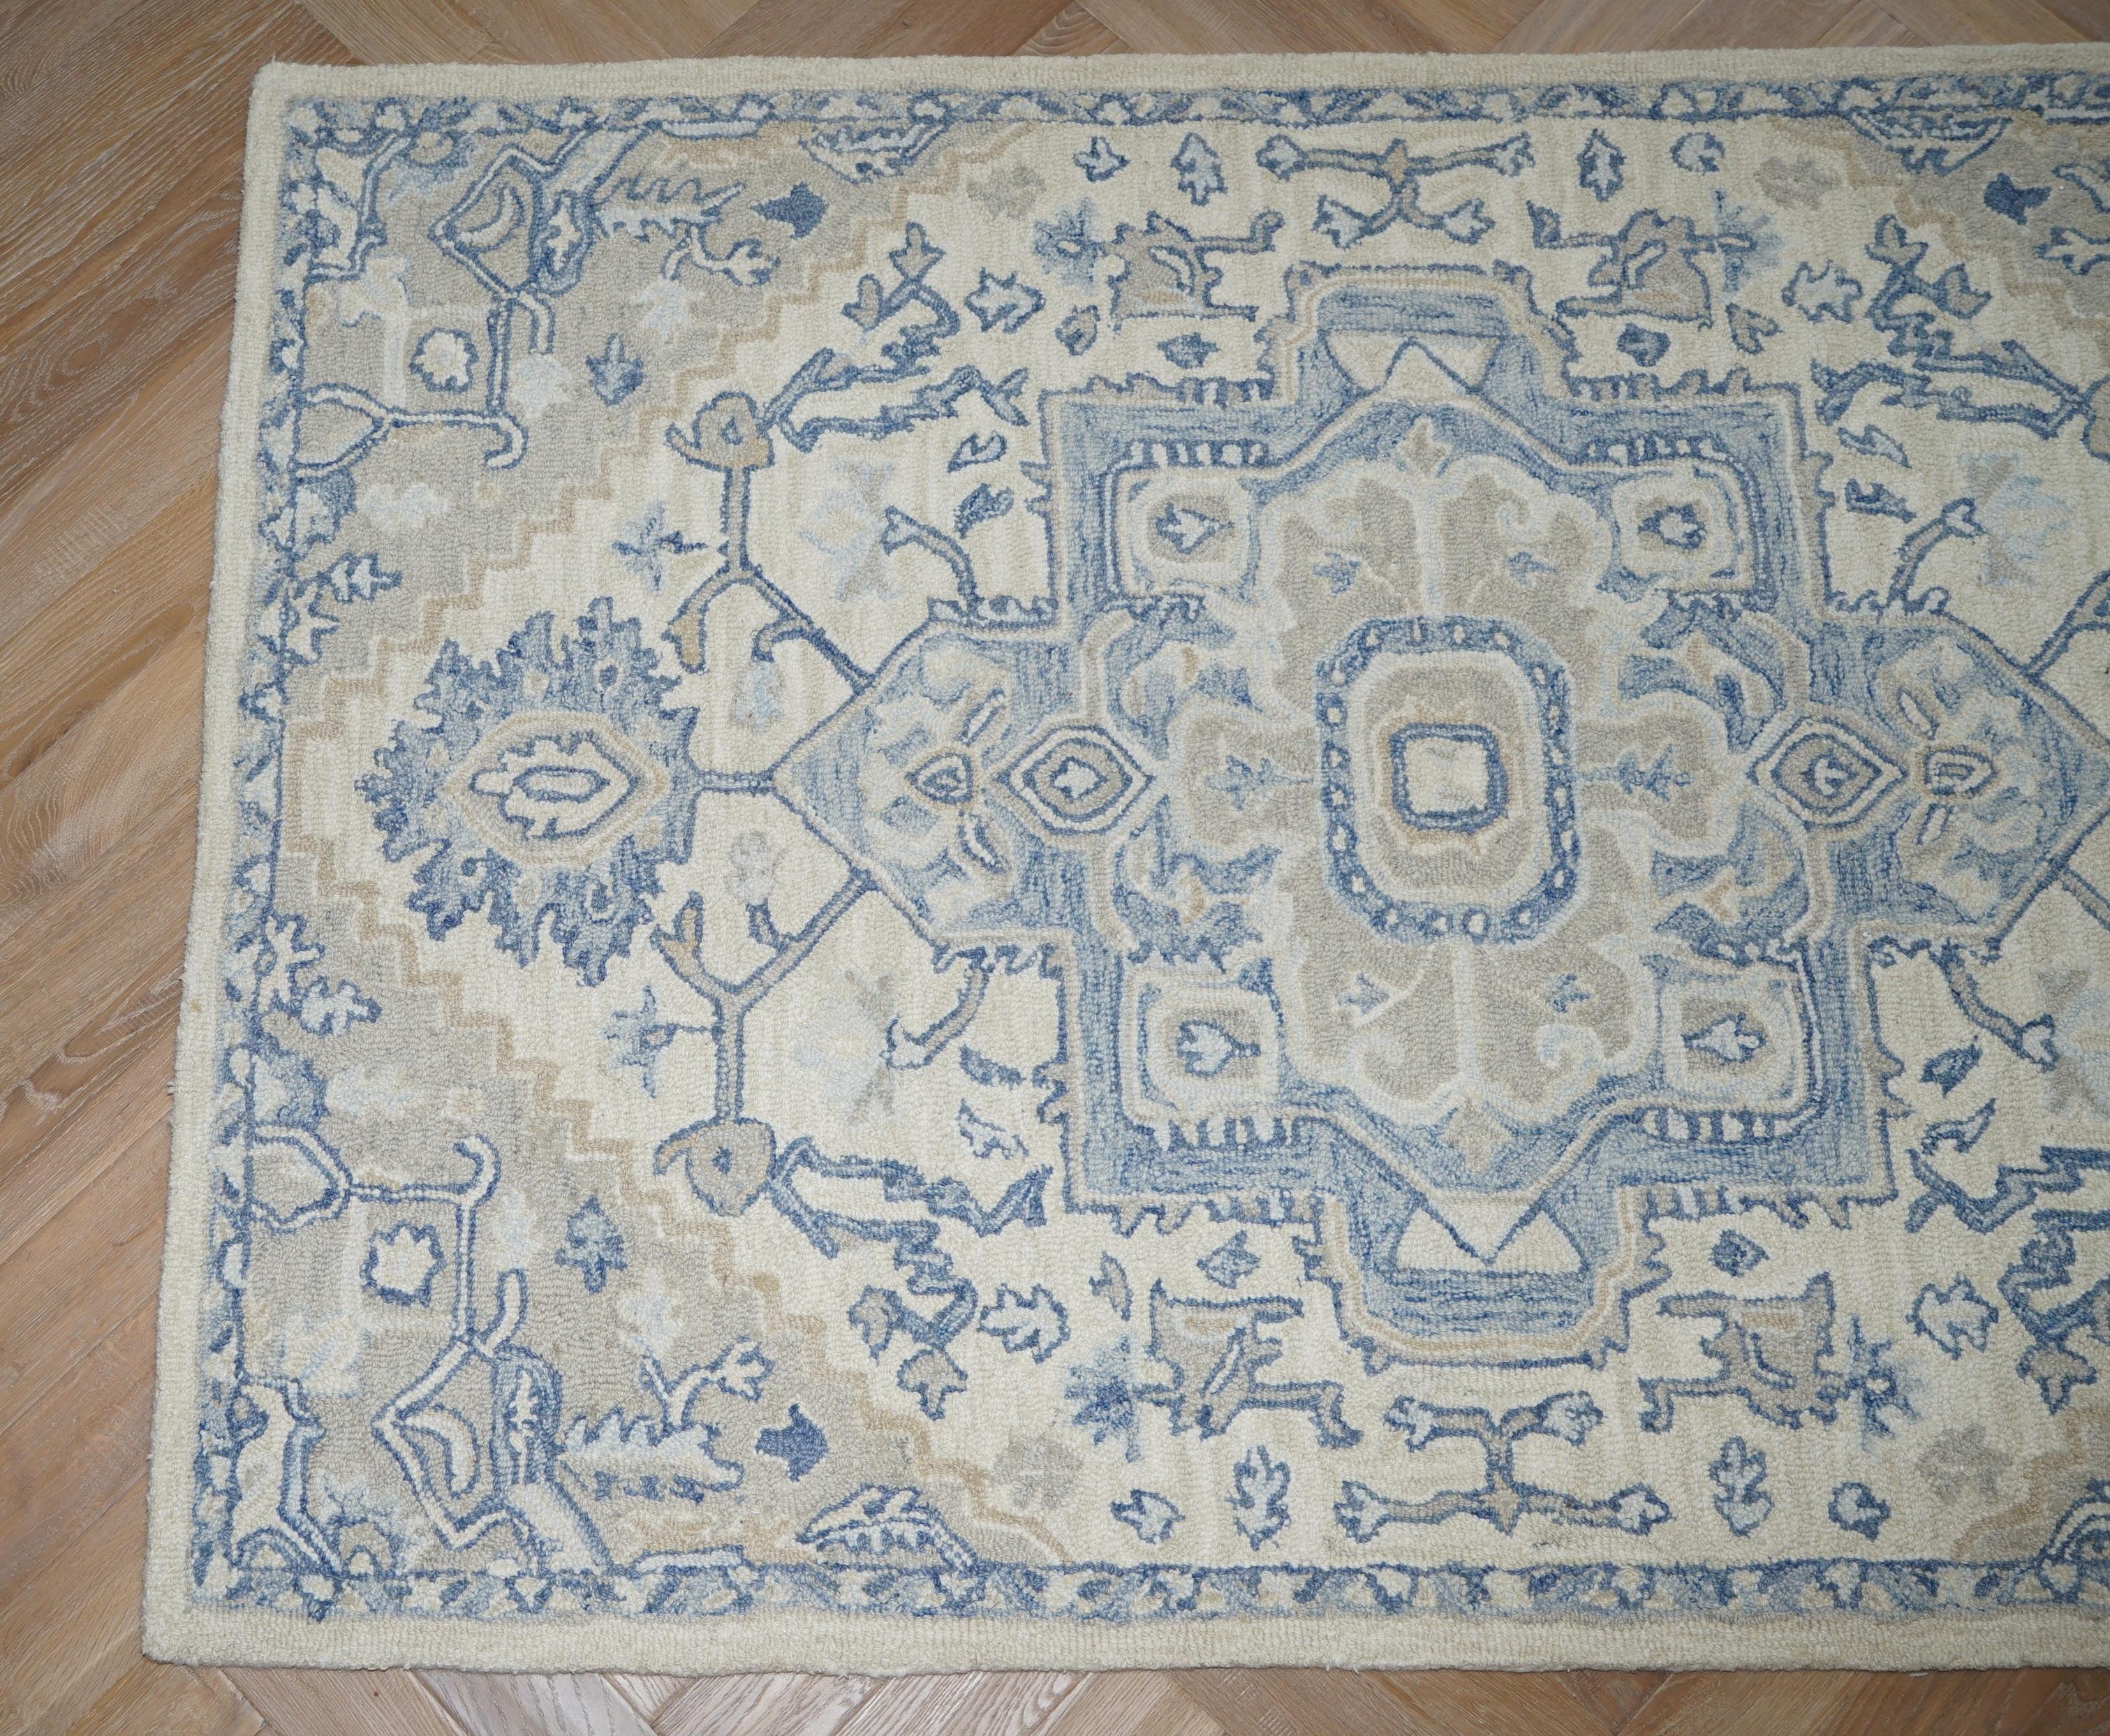 I am delighted to offer for sale this brand new in the original packaging Ralph Lauren 4 feet x 6 feet 100% Wool pile Chinese style rug with 100% cotton backing

I have a number of brand new Ralph Lauren rugs and lamps in stock, please view my